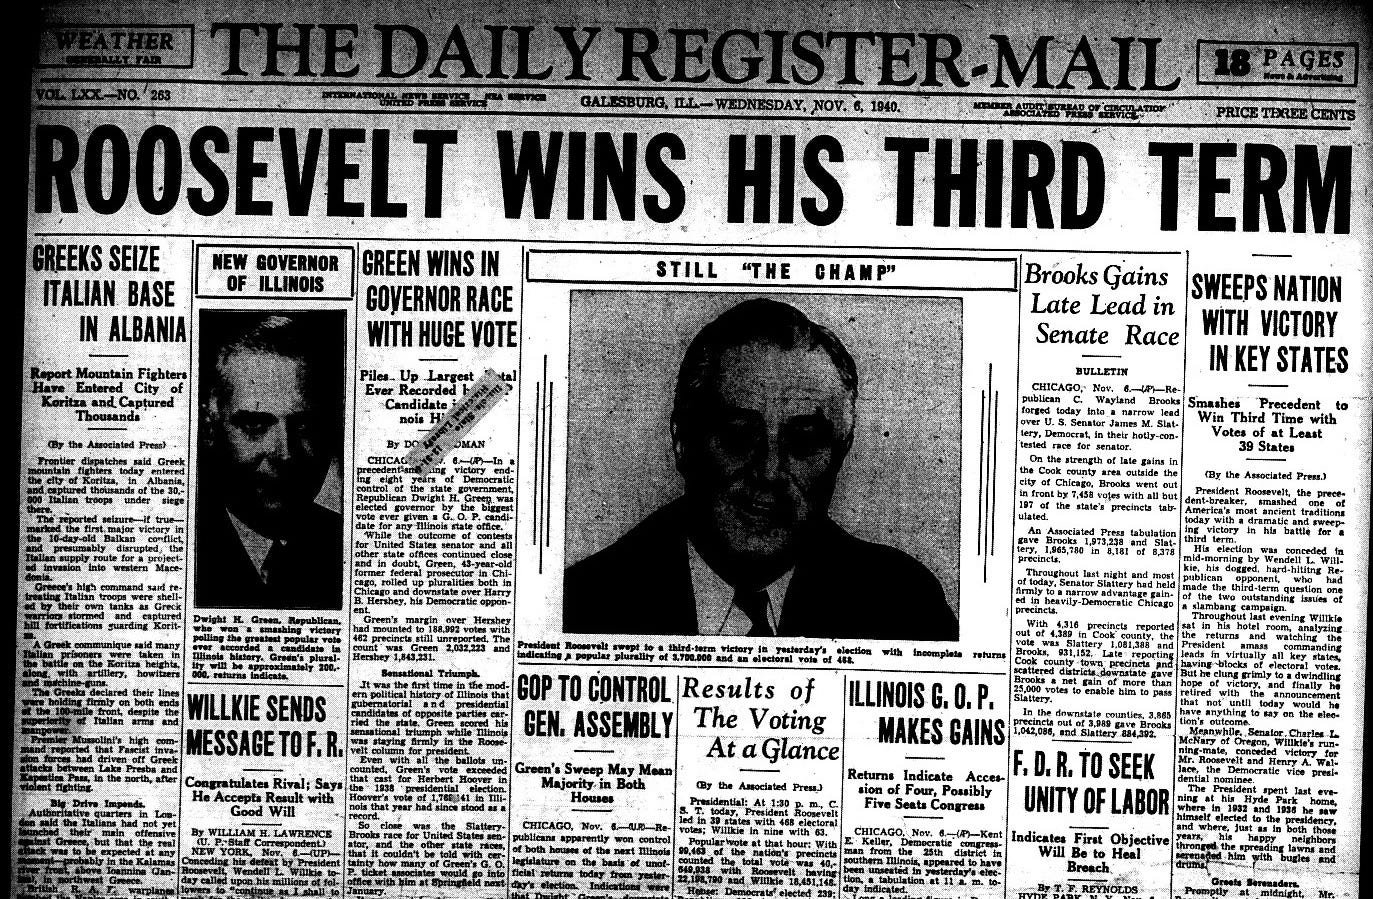 FDR 3rd Election as US President